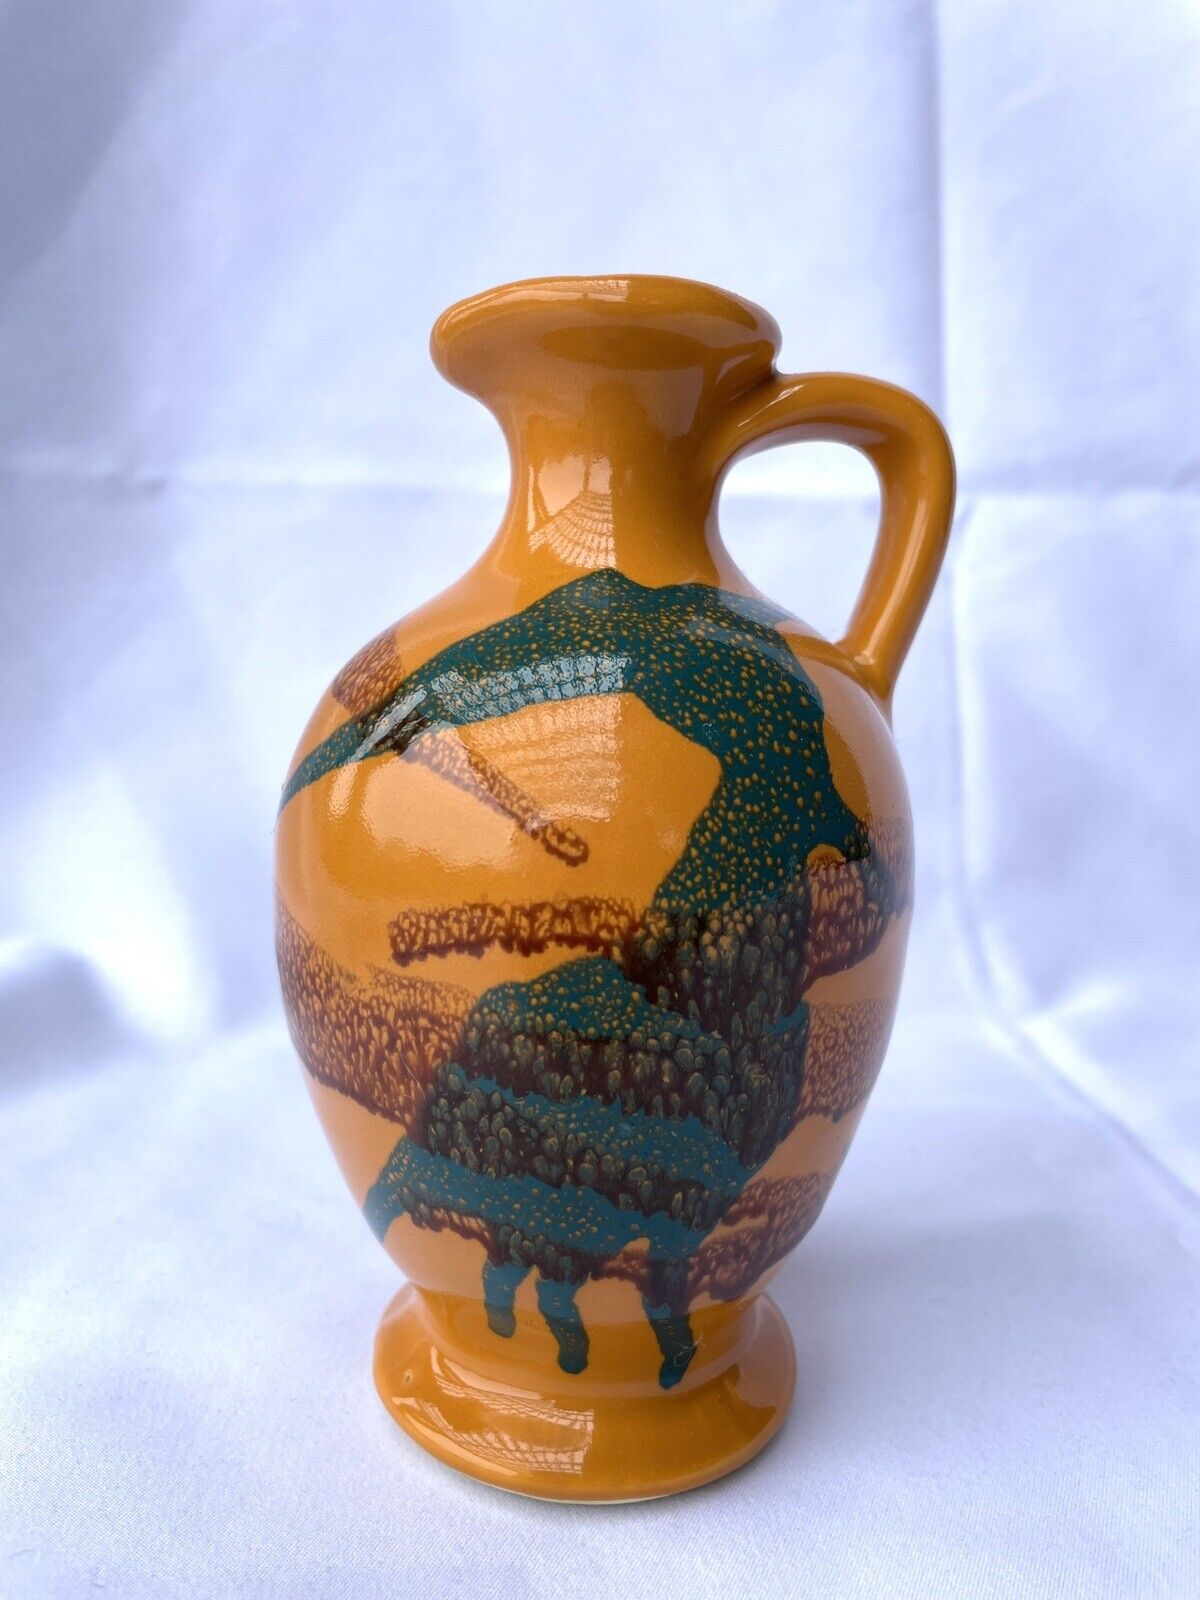 Vintage Hand Painted Ceramic Bud Vase With Handle - Yellow - Teal - Marroon